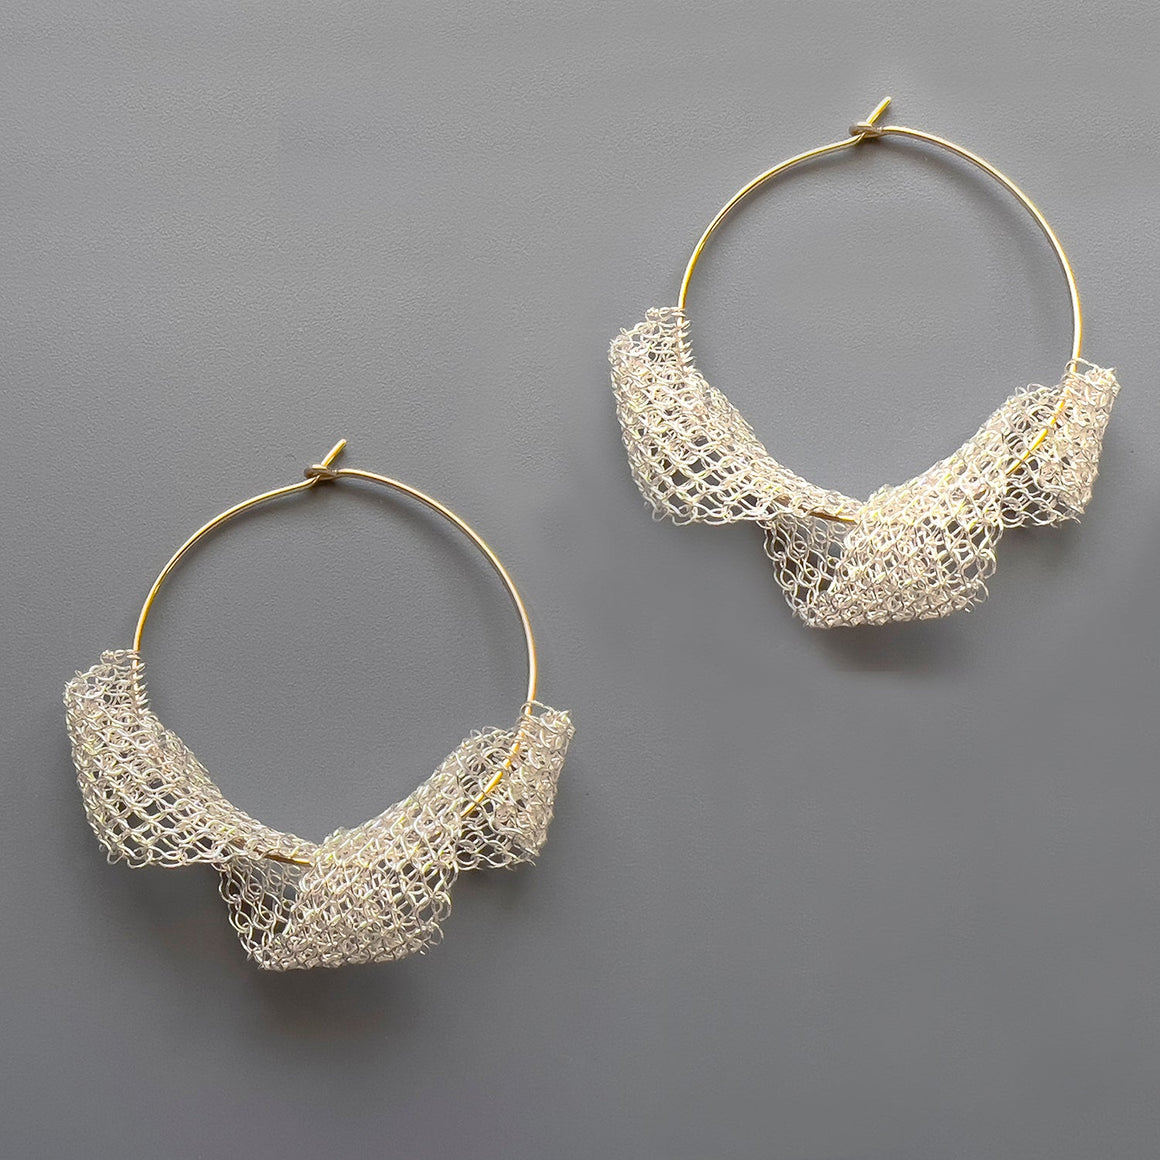 Chic Twisted Hoop Earrings in 1.5" Gold Size - Elevate Your Style with Our Stunning Collection - yooladesign